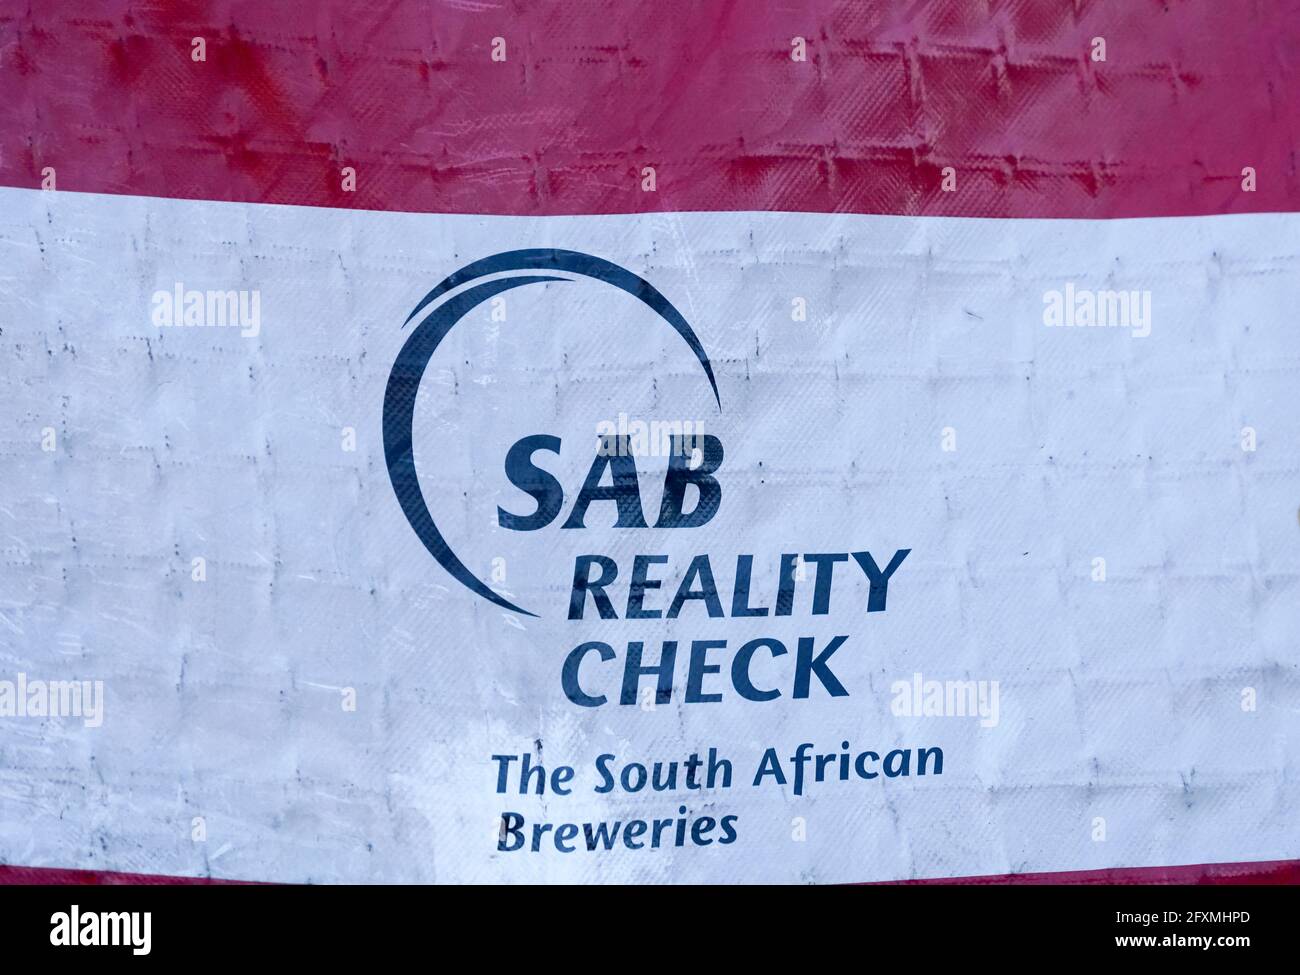 SAB, South African Breweries, sign and logo on a covering in South Africa concept beer industry in Africa Stock Photo